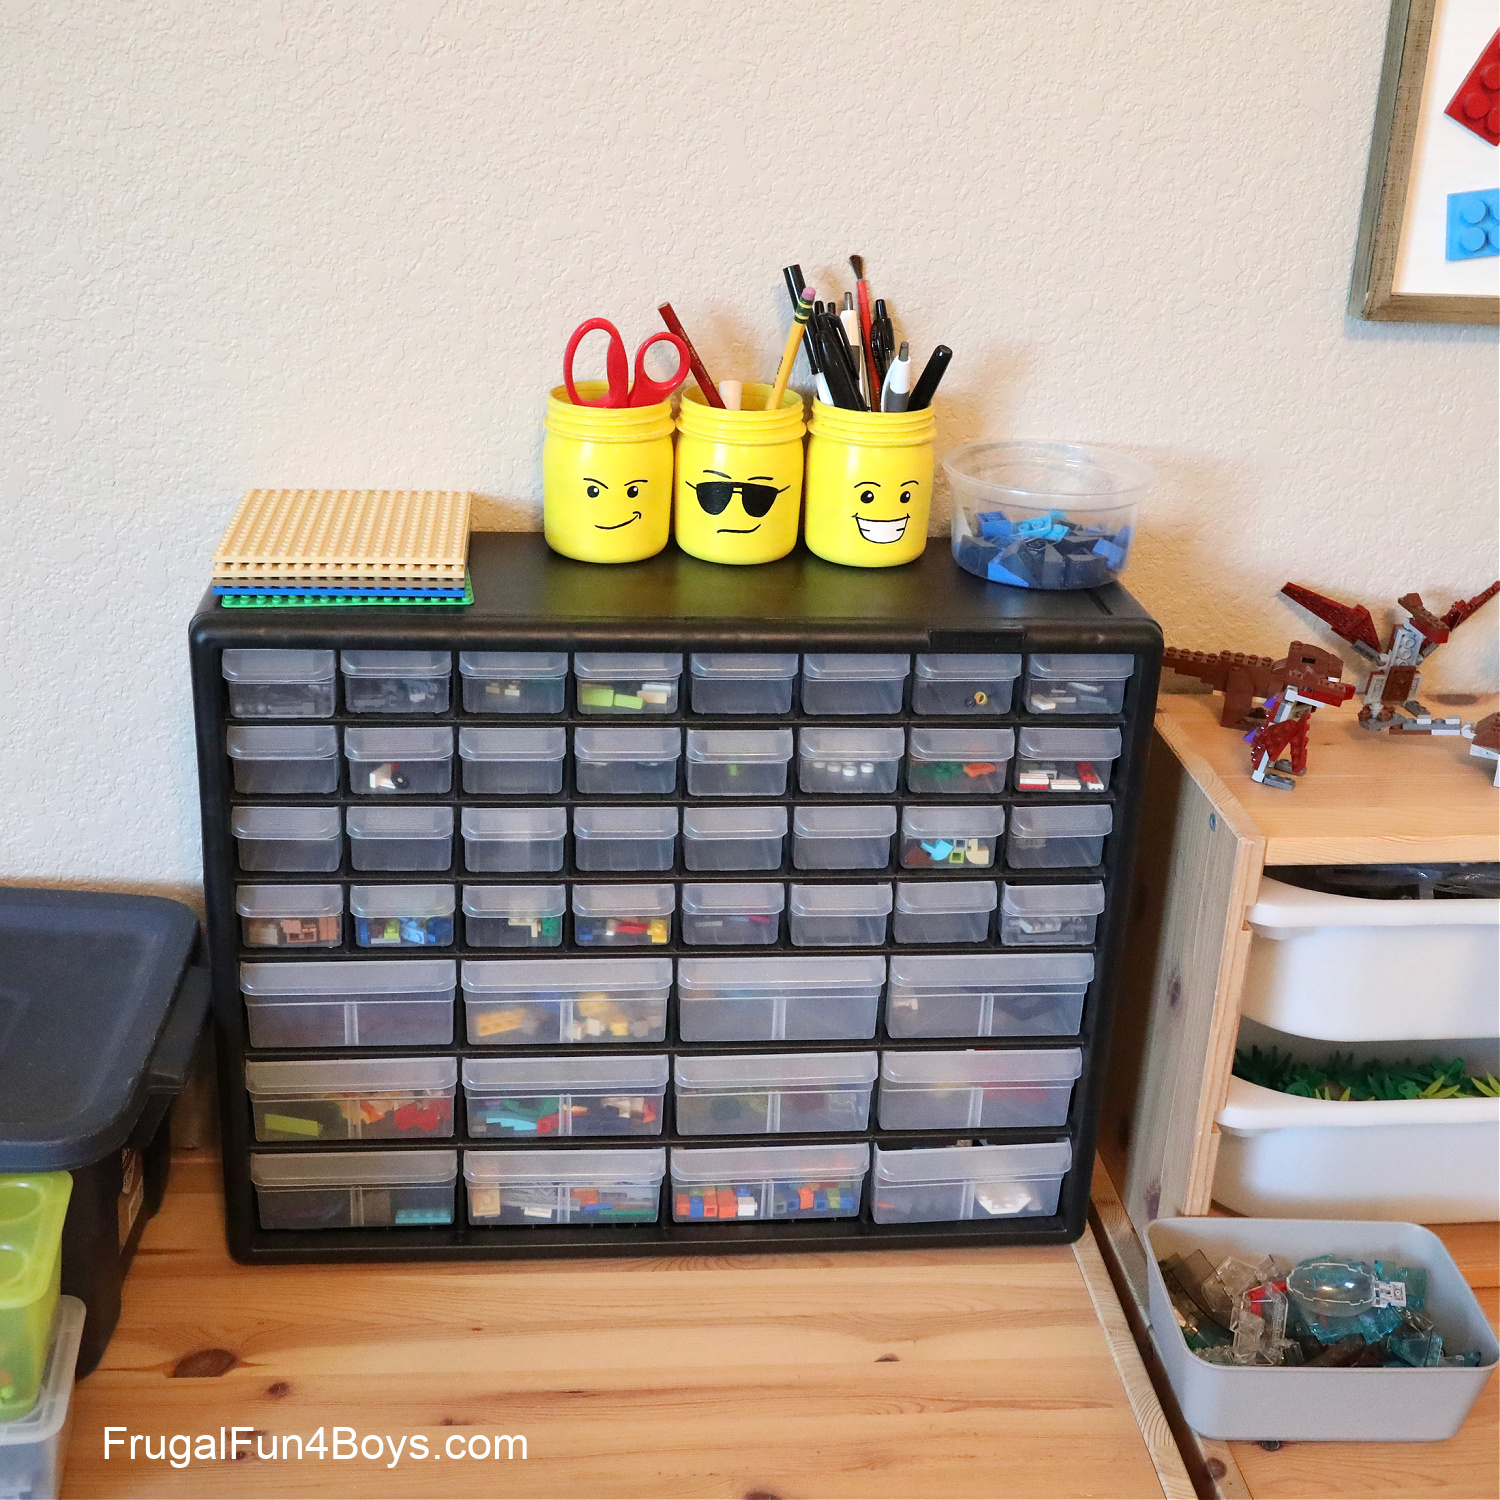 Lego Storage and Organizational Solutions